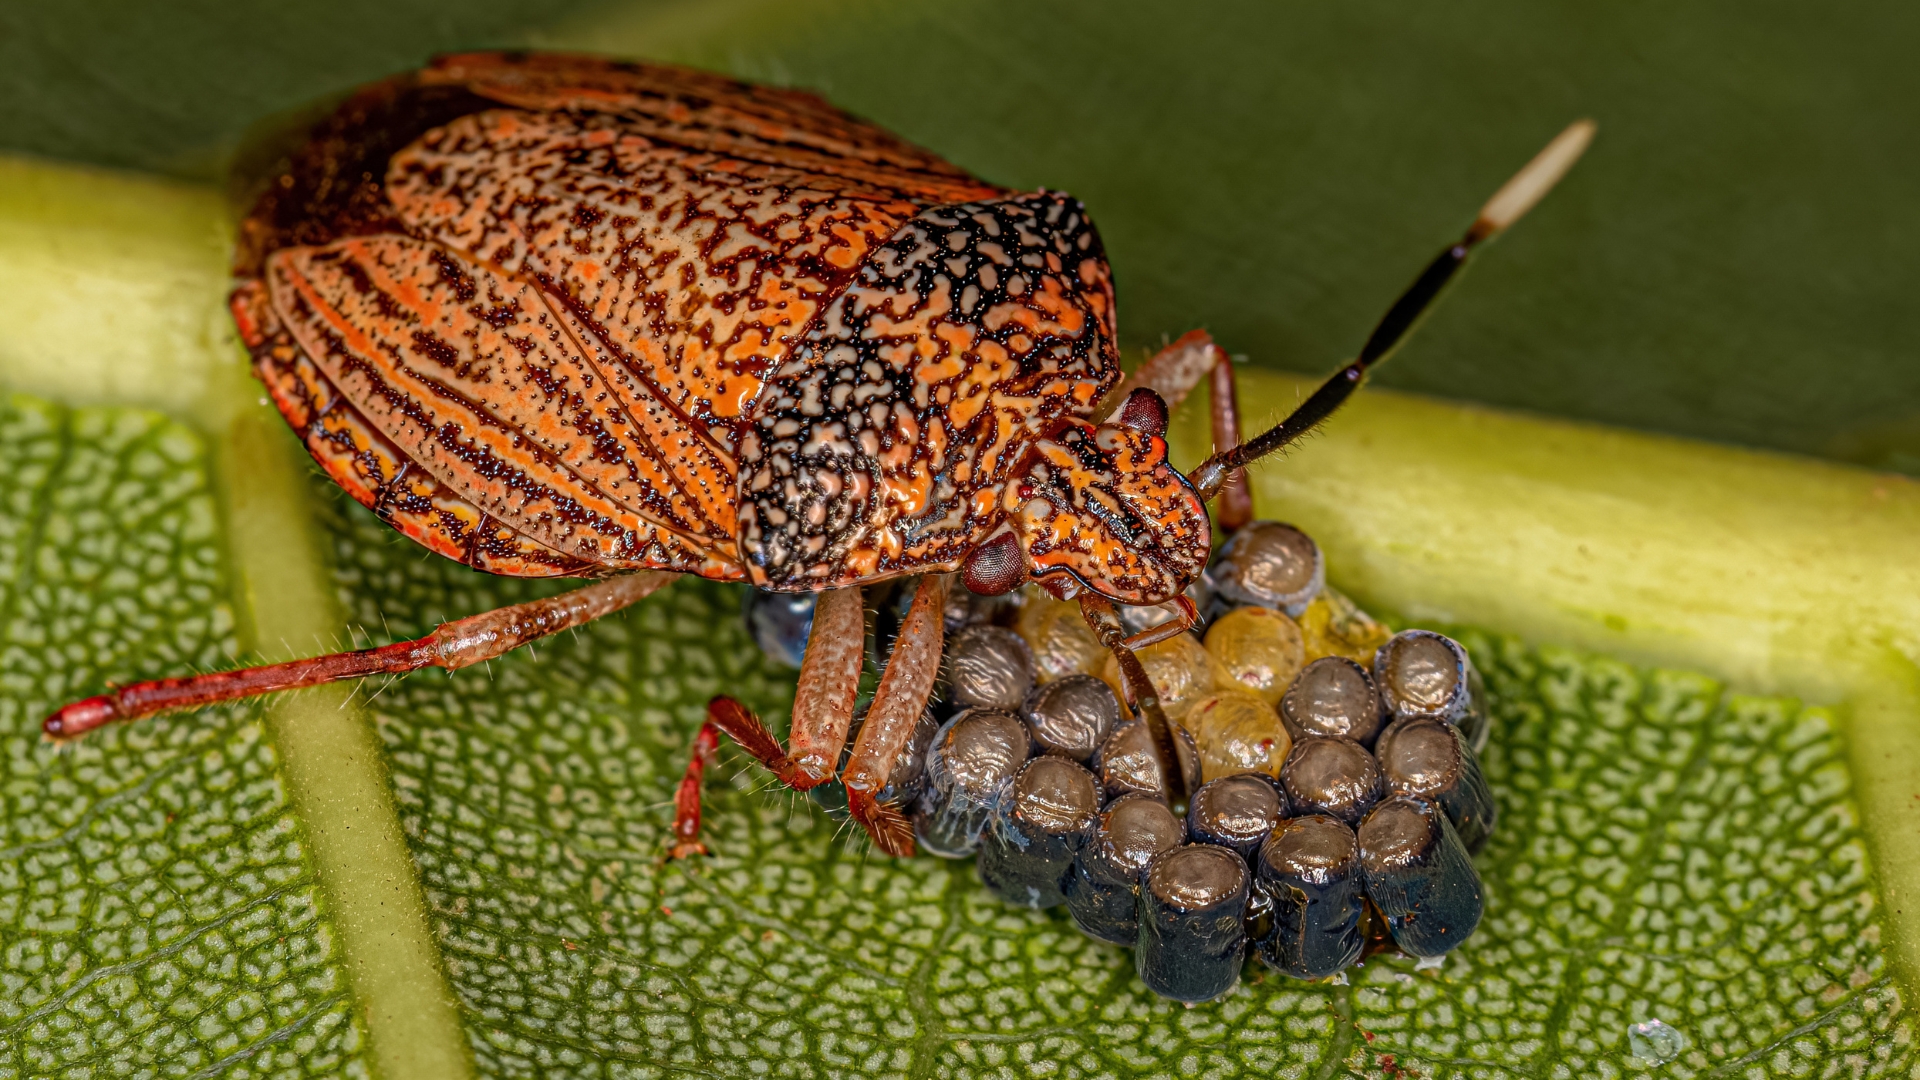 7 Methods To Deal With Stink Bugs In Your Home And Garden